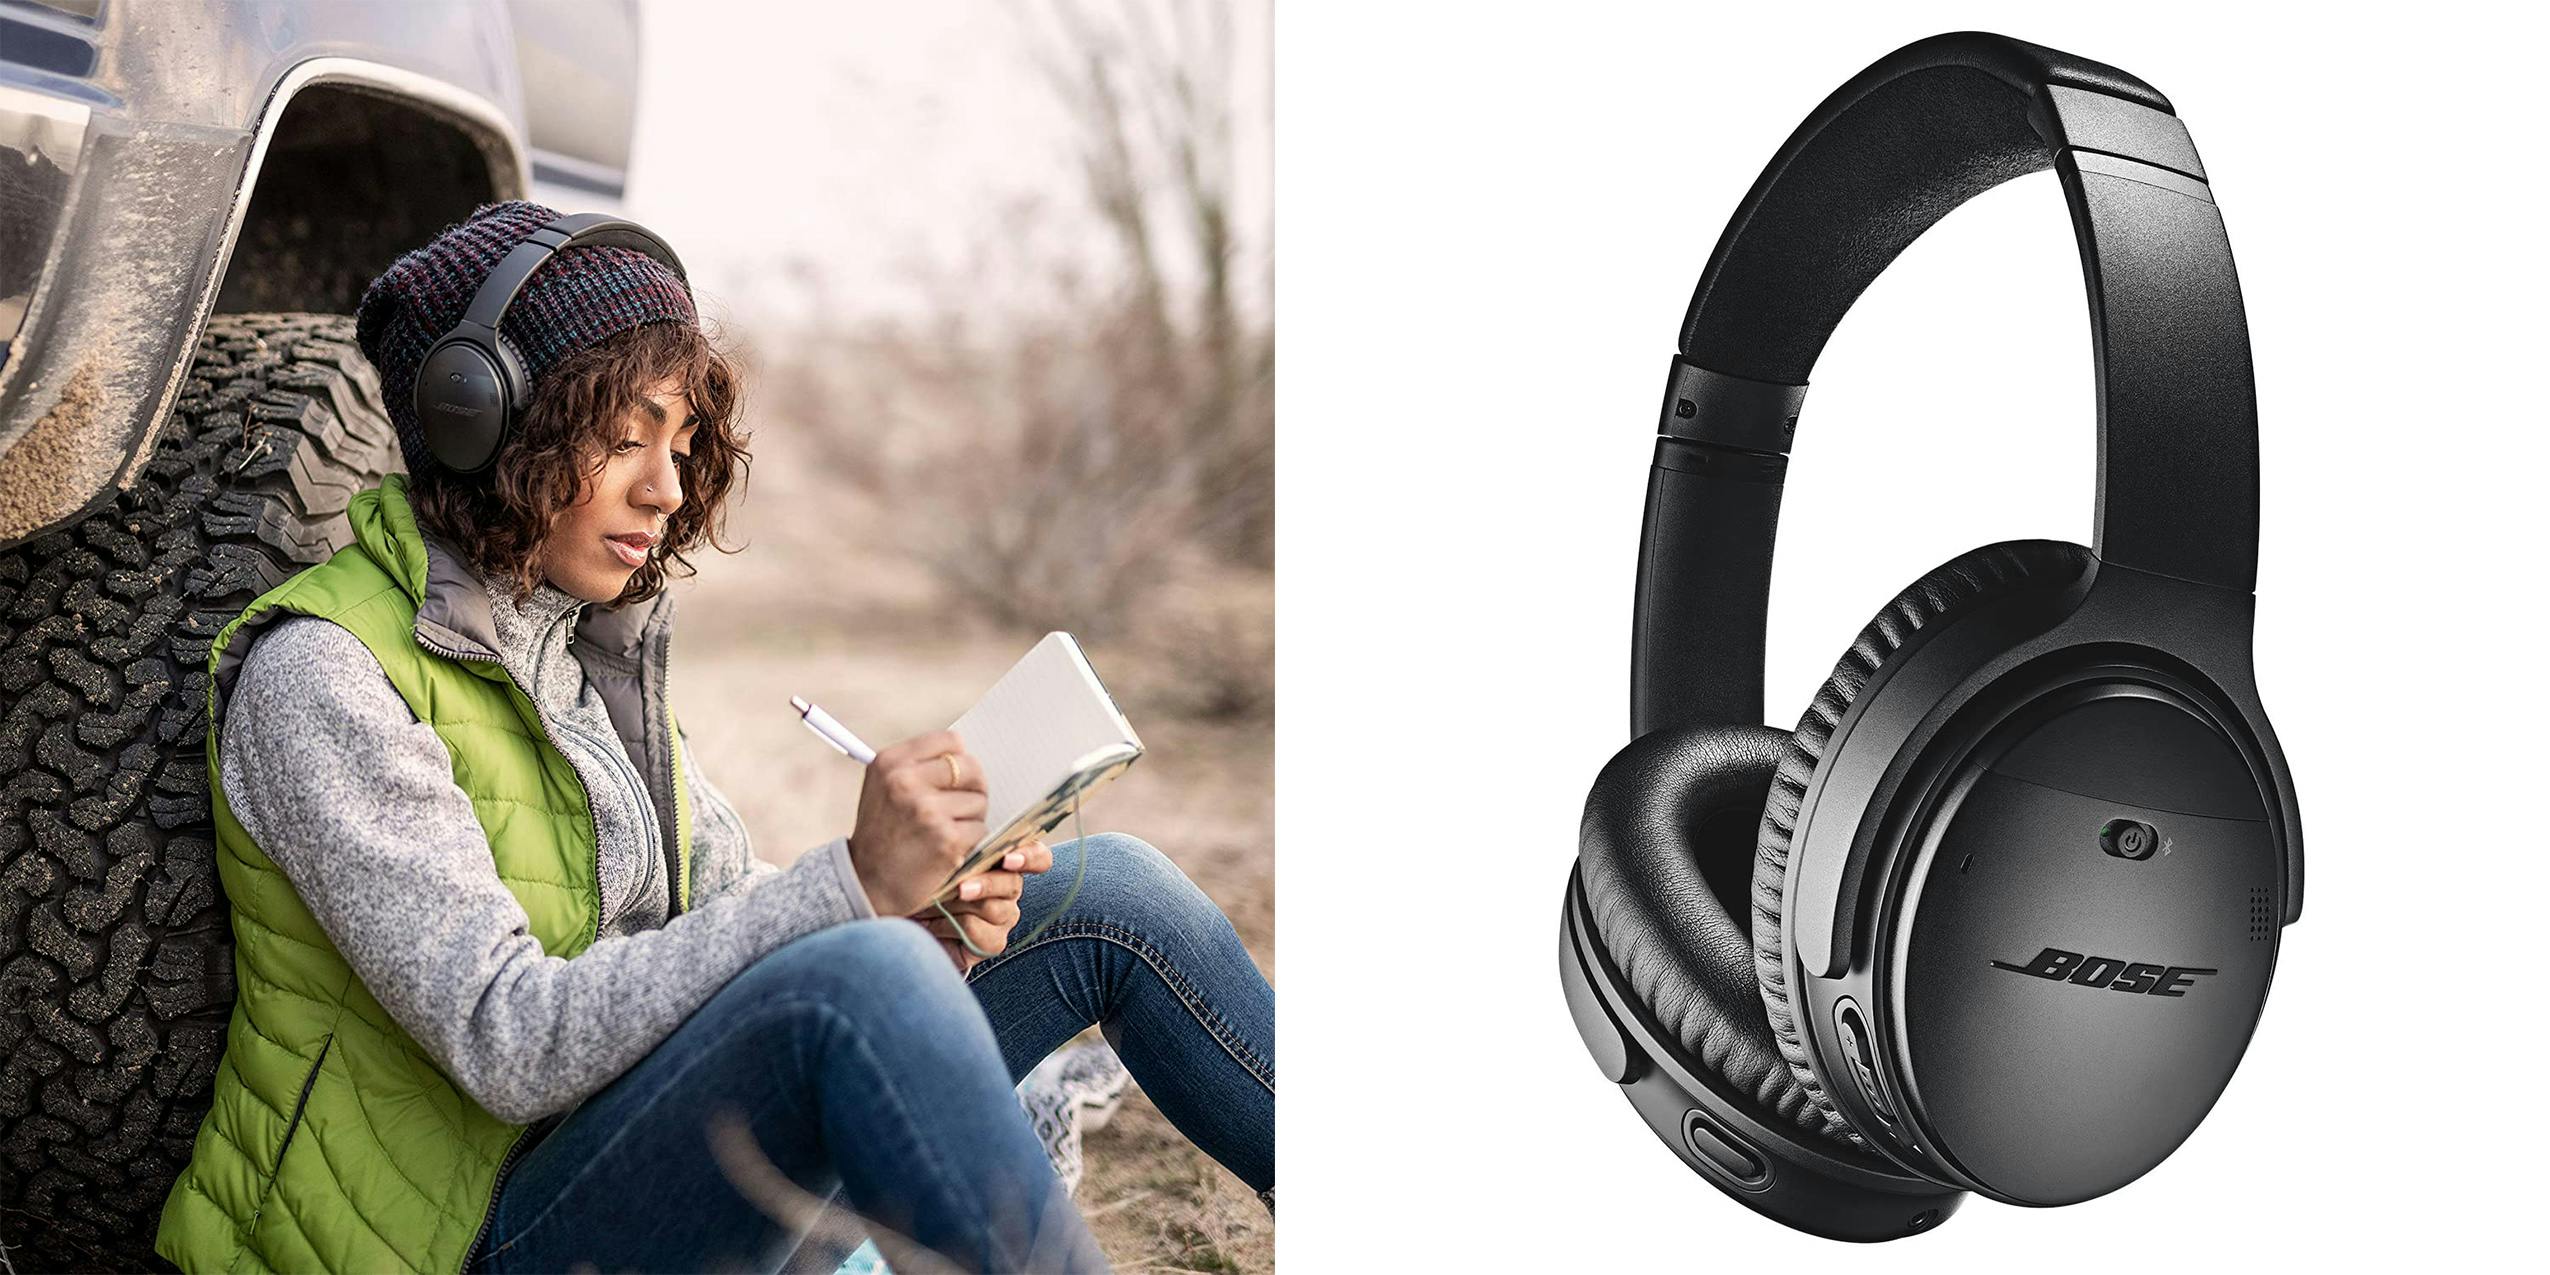 A woman wearing Bose QuietComfort headphones while writing in a notebook.